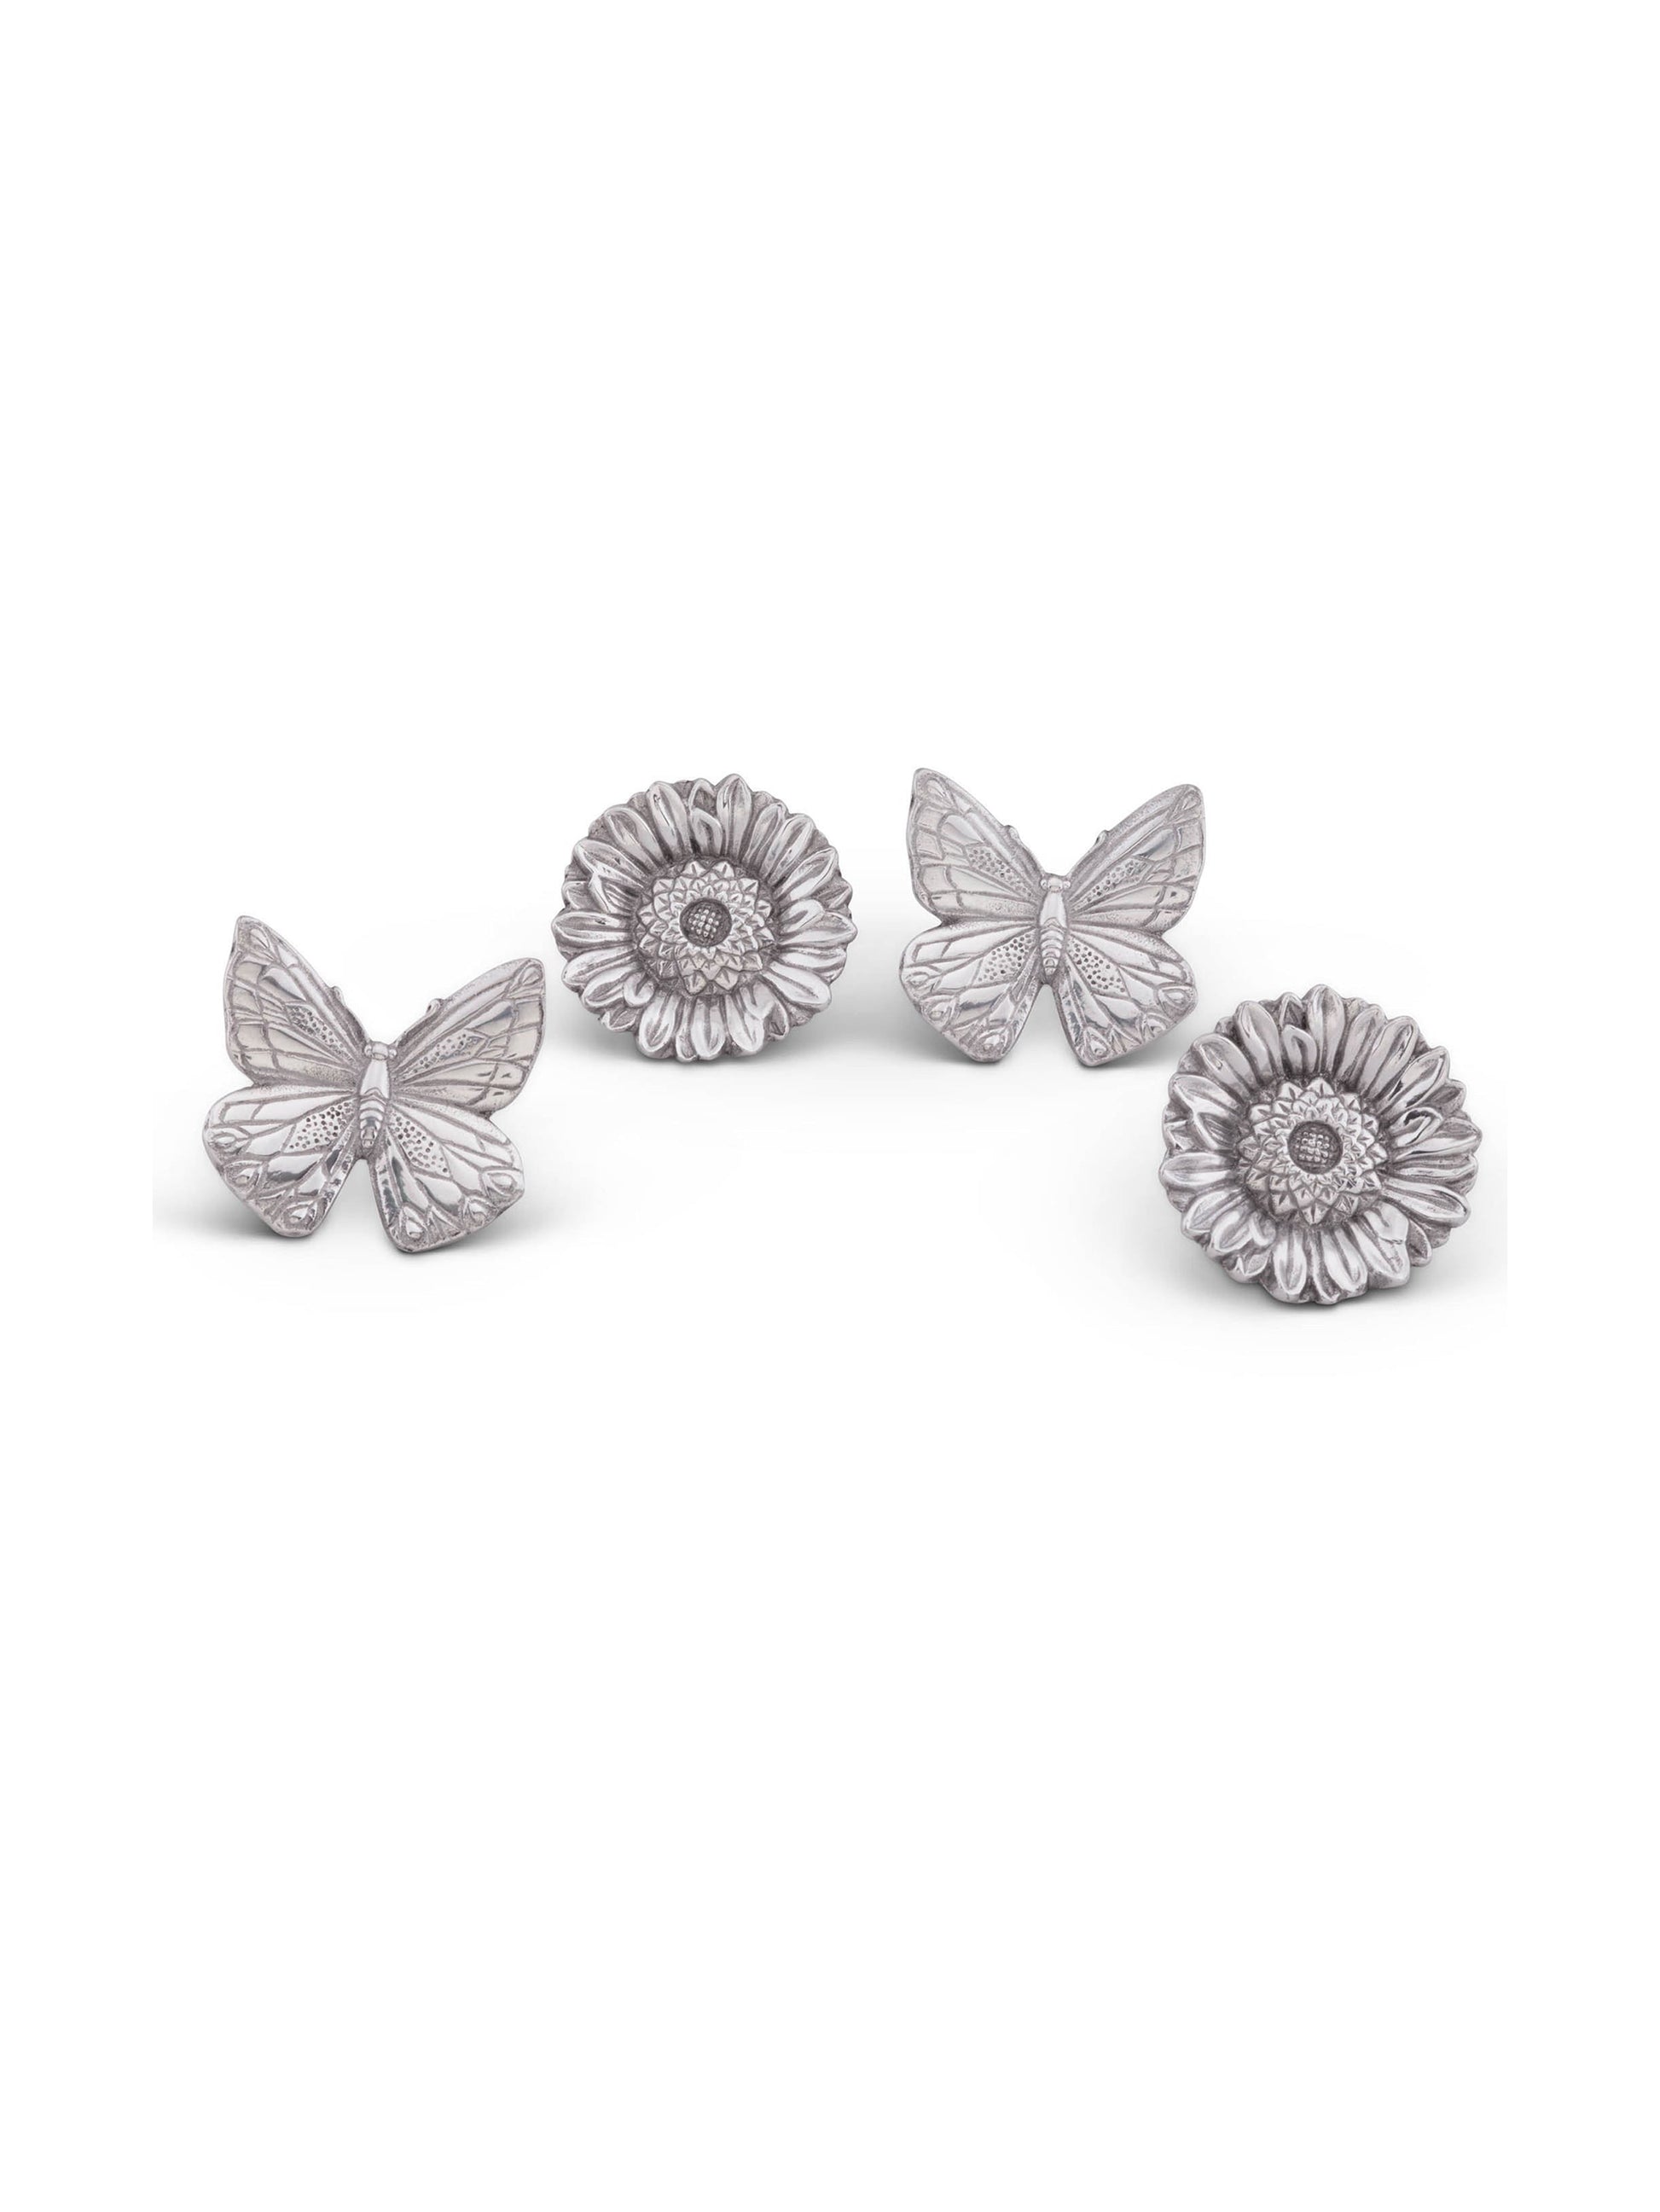 Butterfly and Flower Napkin Rings Weston Table